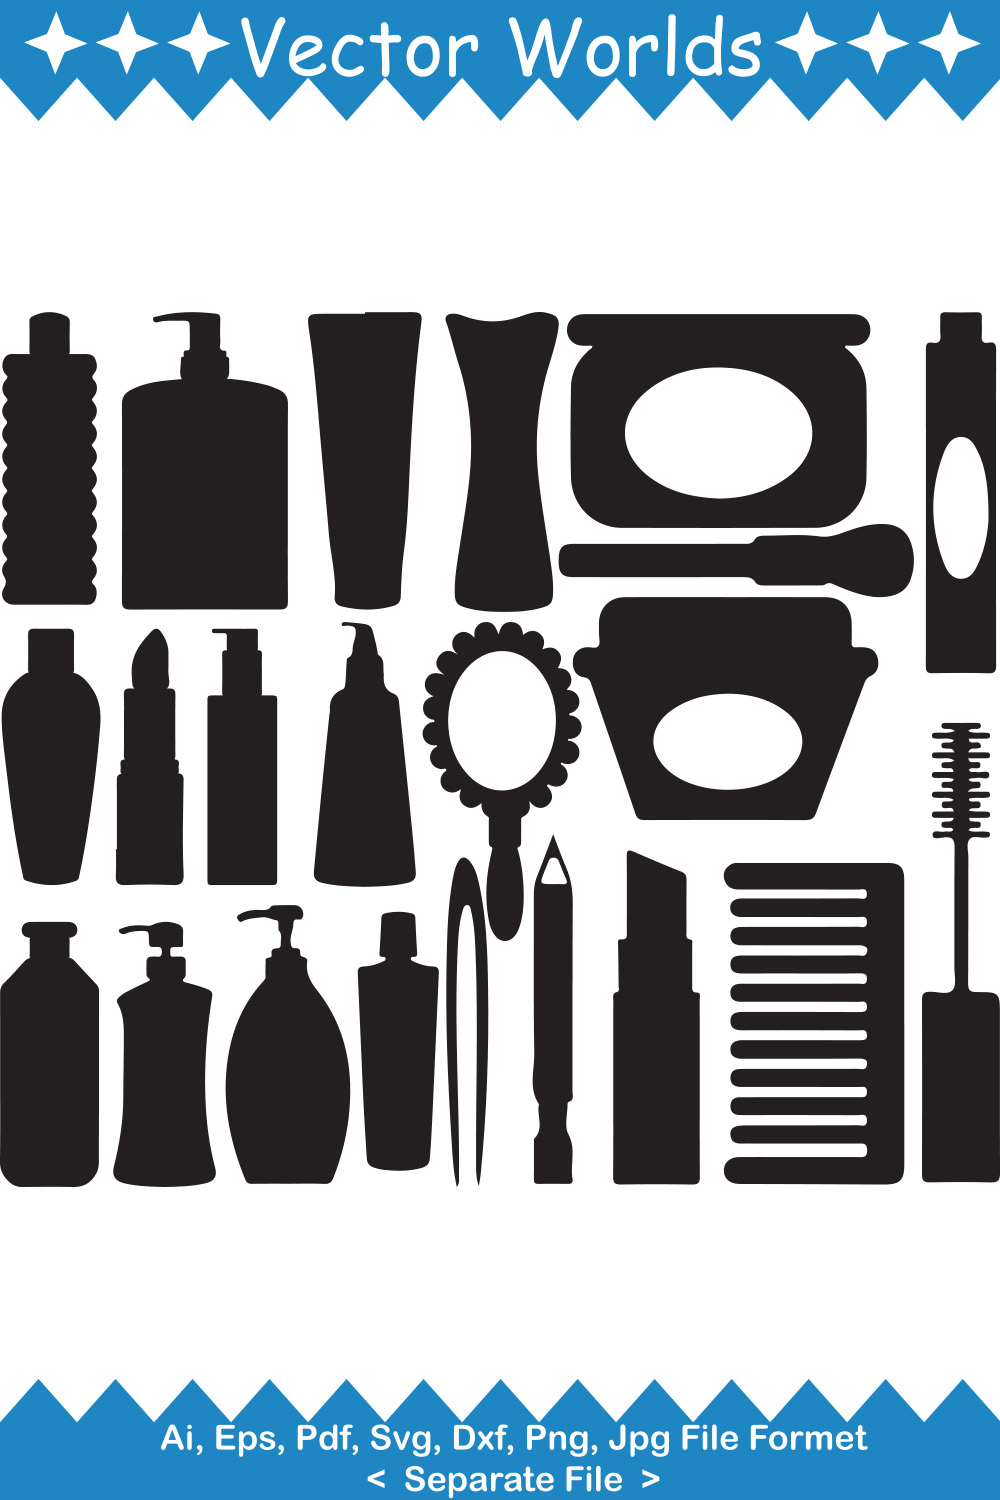 Set of wonderful vector images of silhouettes of cosmetics